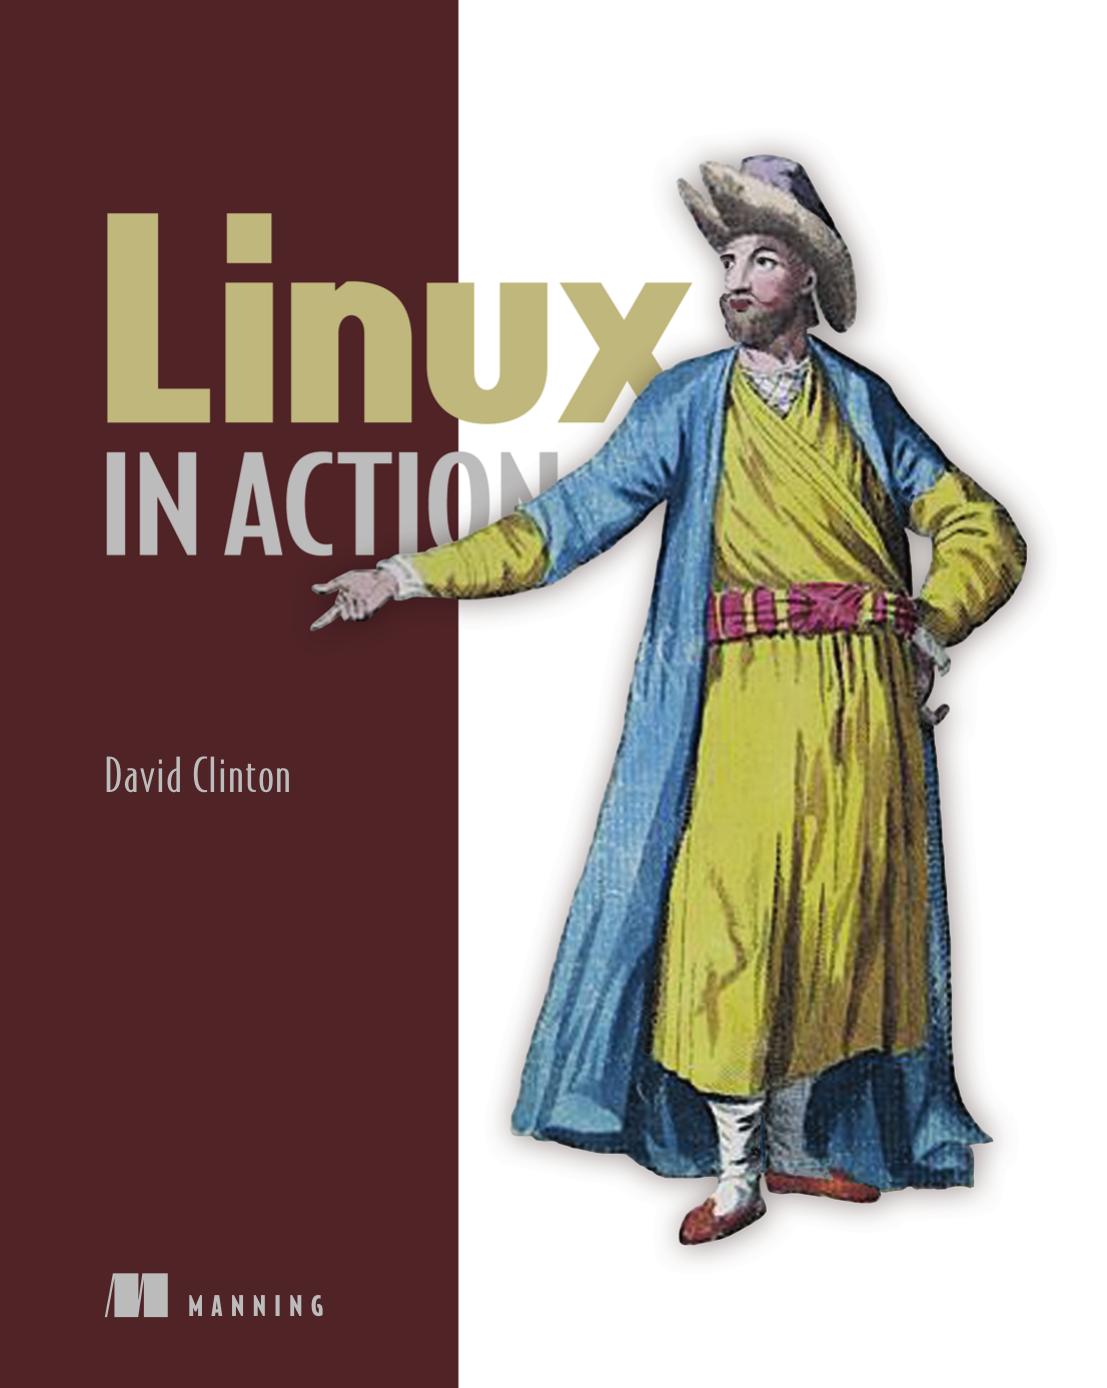 Linux in Action by David Clinton